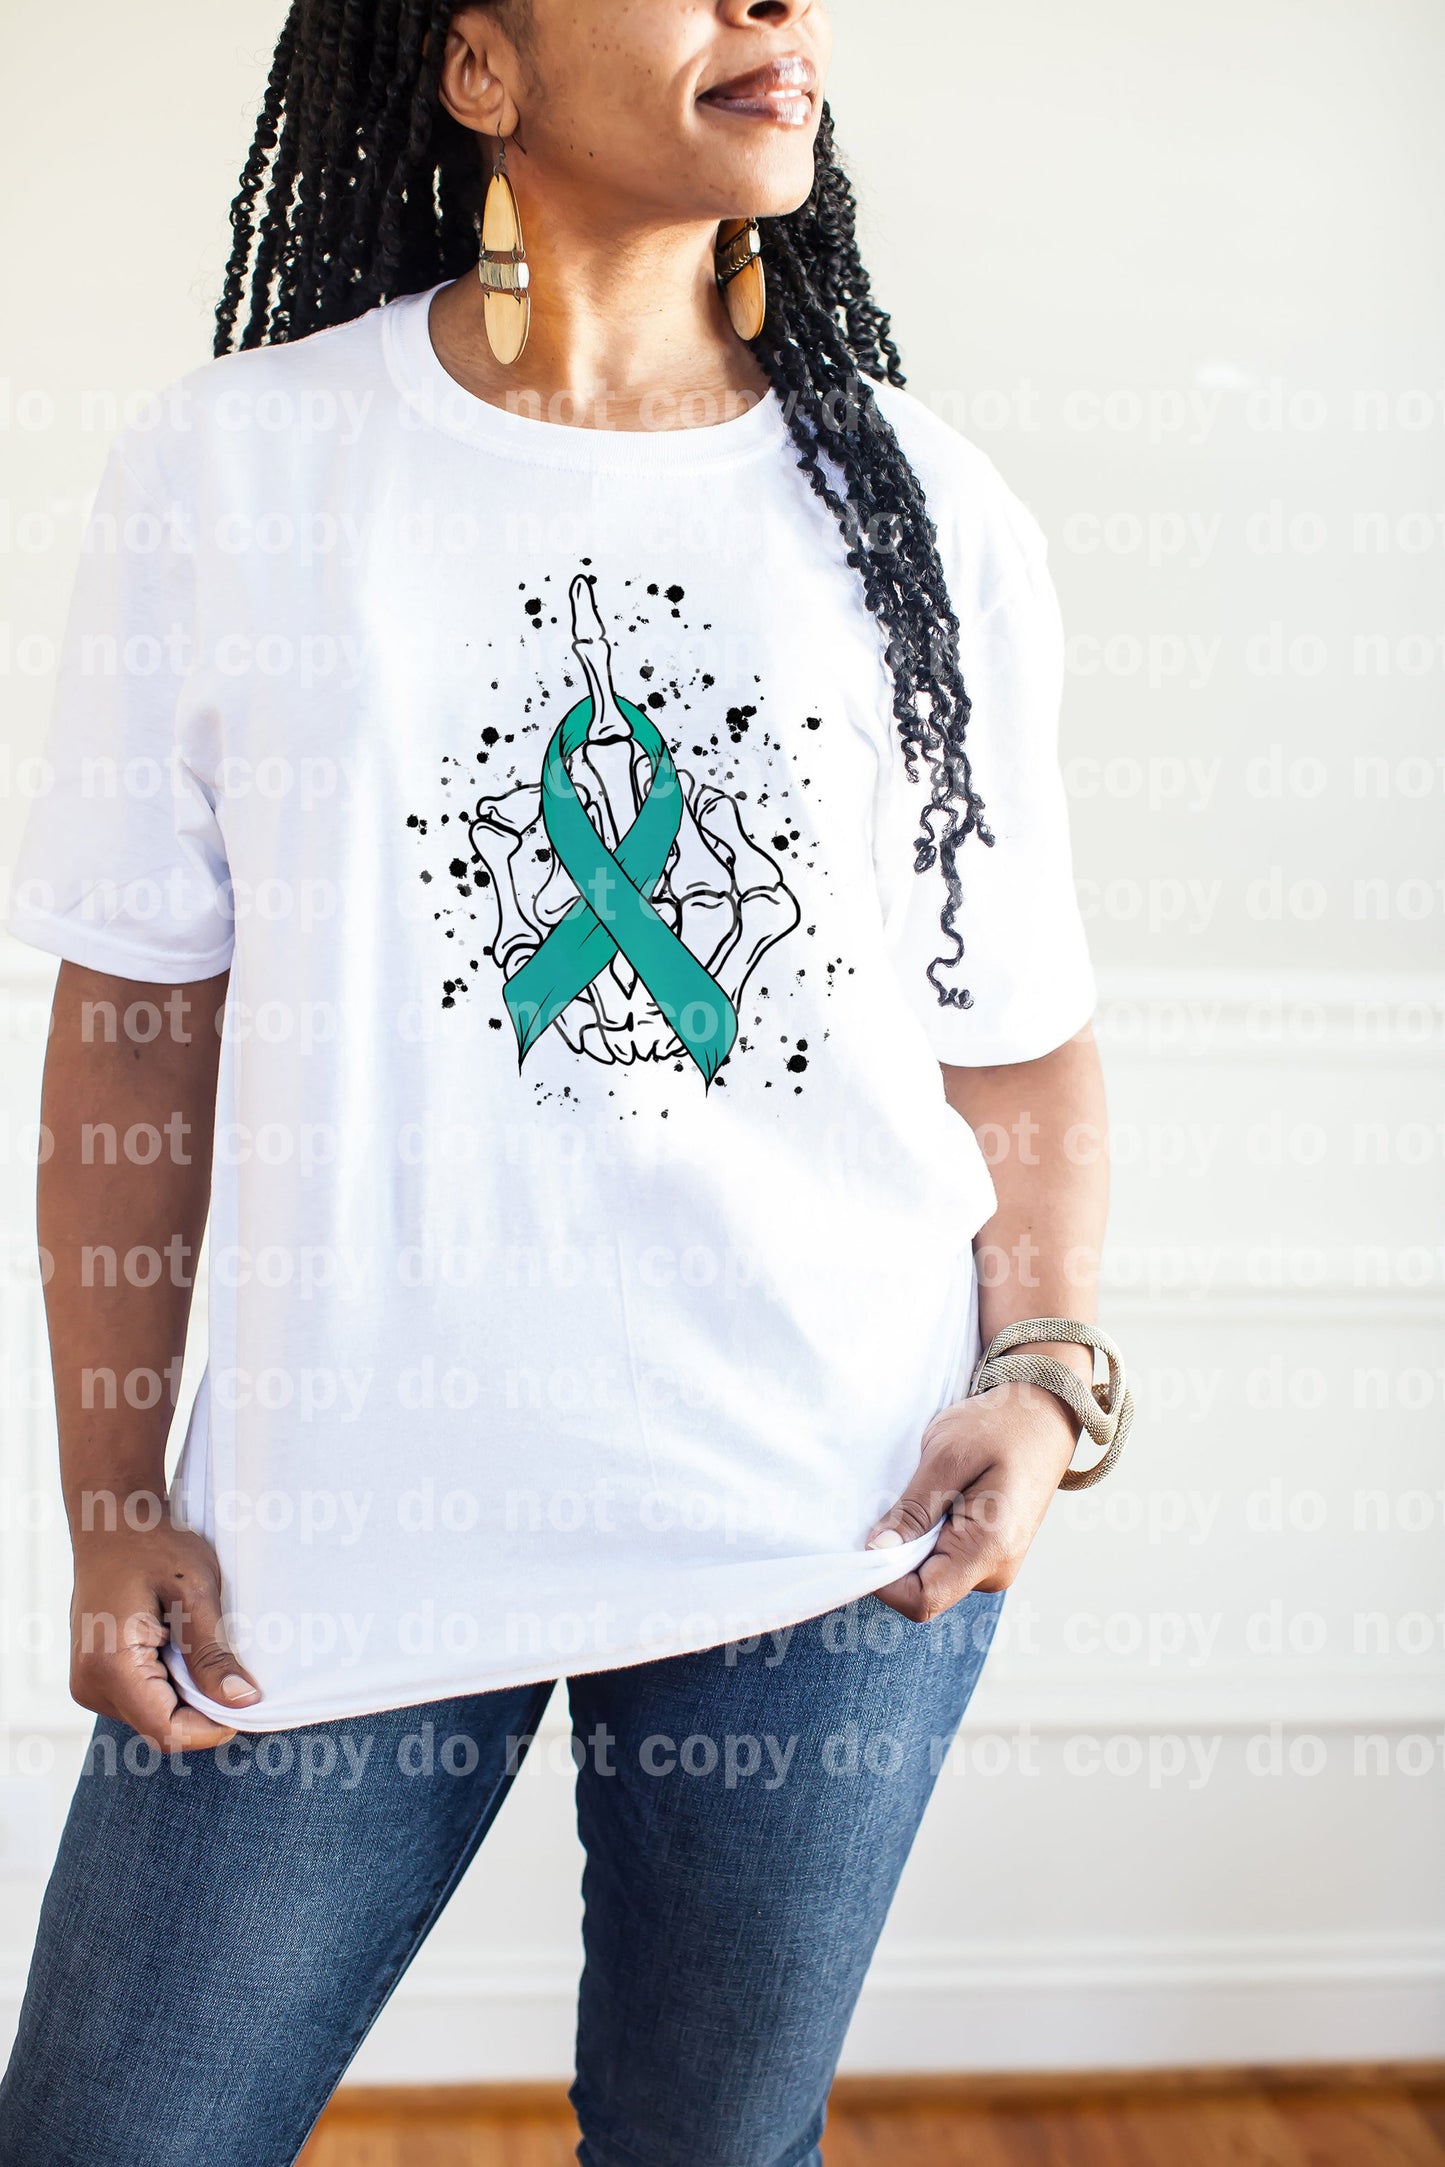 Teal Cancer Ribbon Dream Print or Sublimation Print